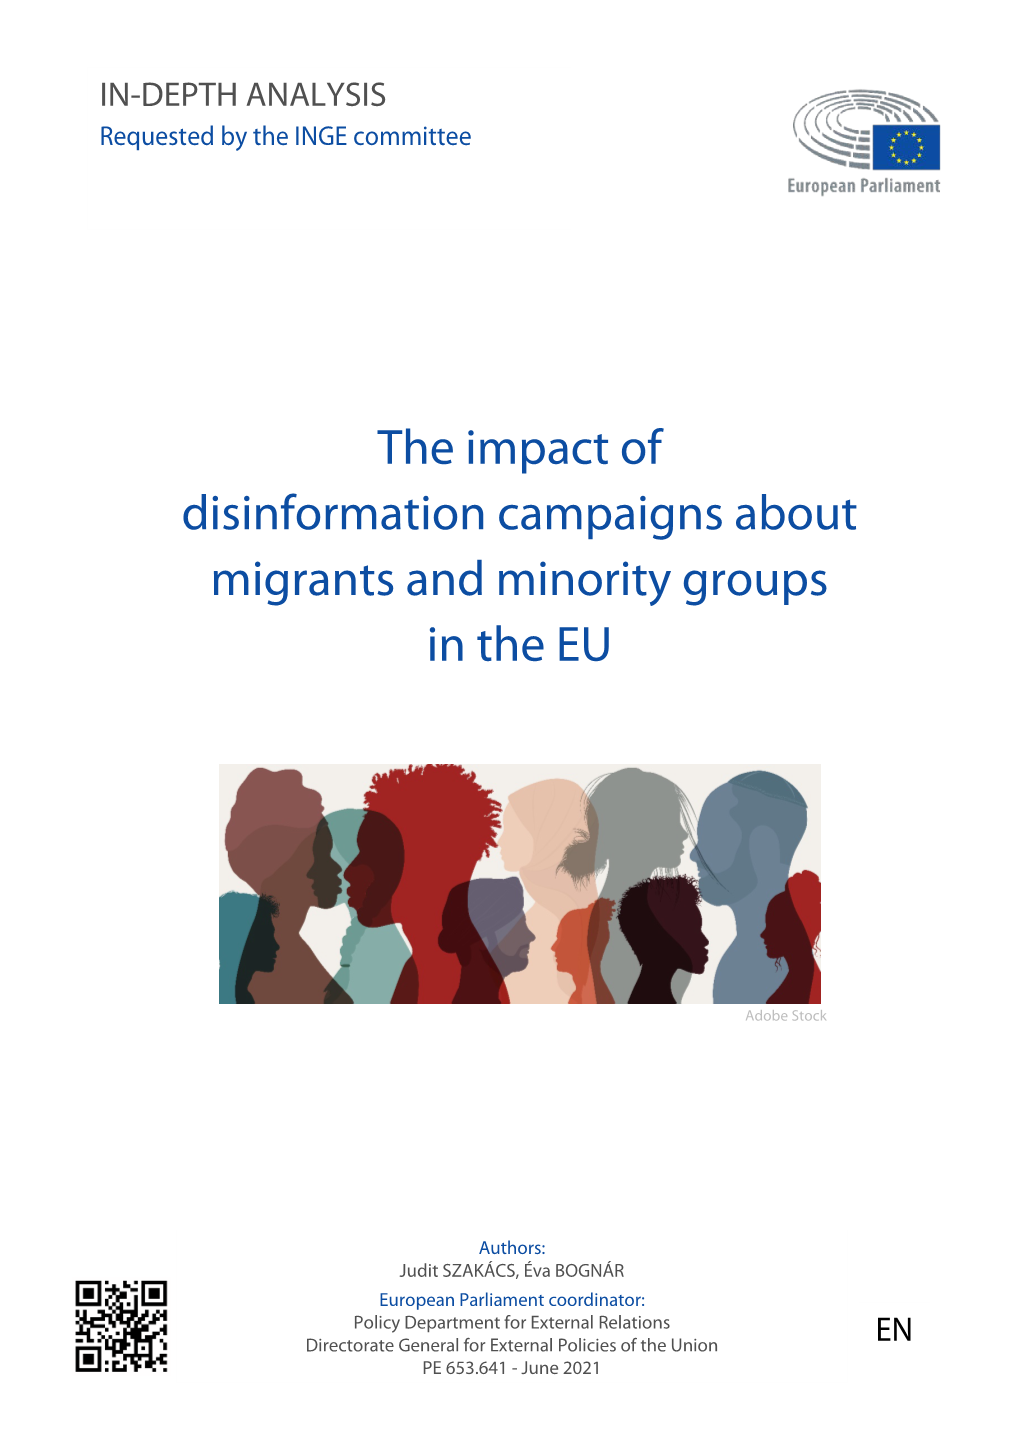 The Impact of Disinformation Campaigns About Migrants and Minority Groups in the EU